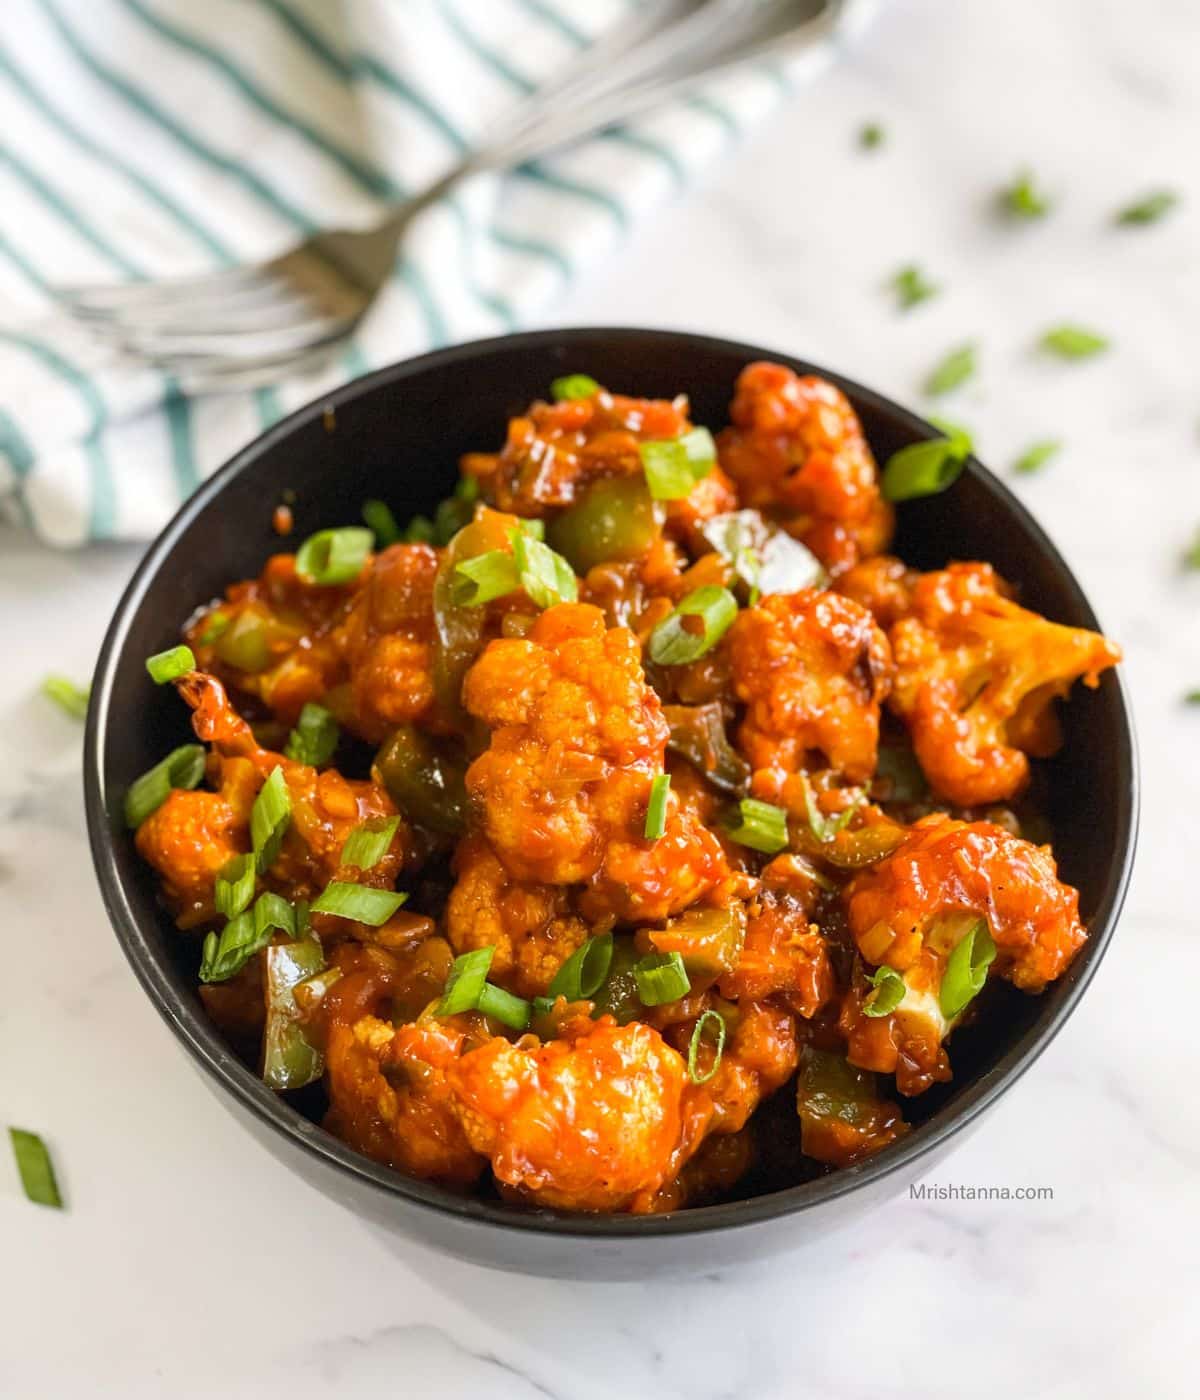 Gobi Manchurian is on the bowl topped with green onions.